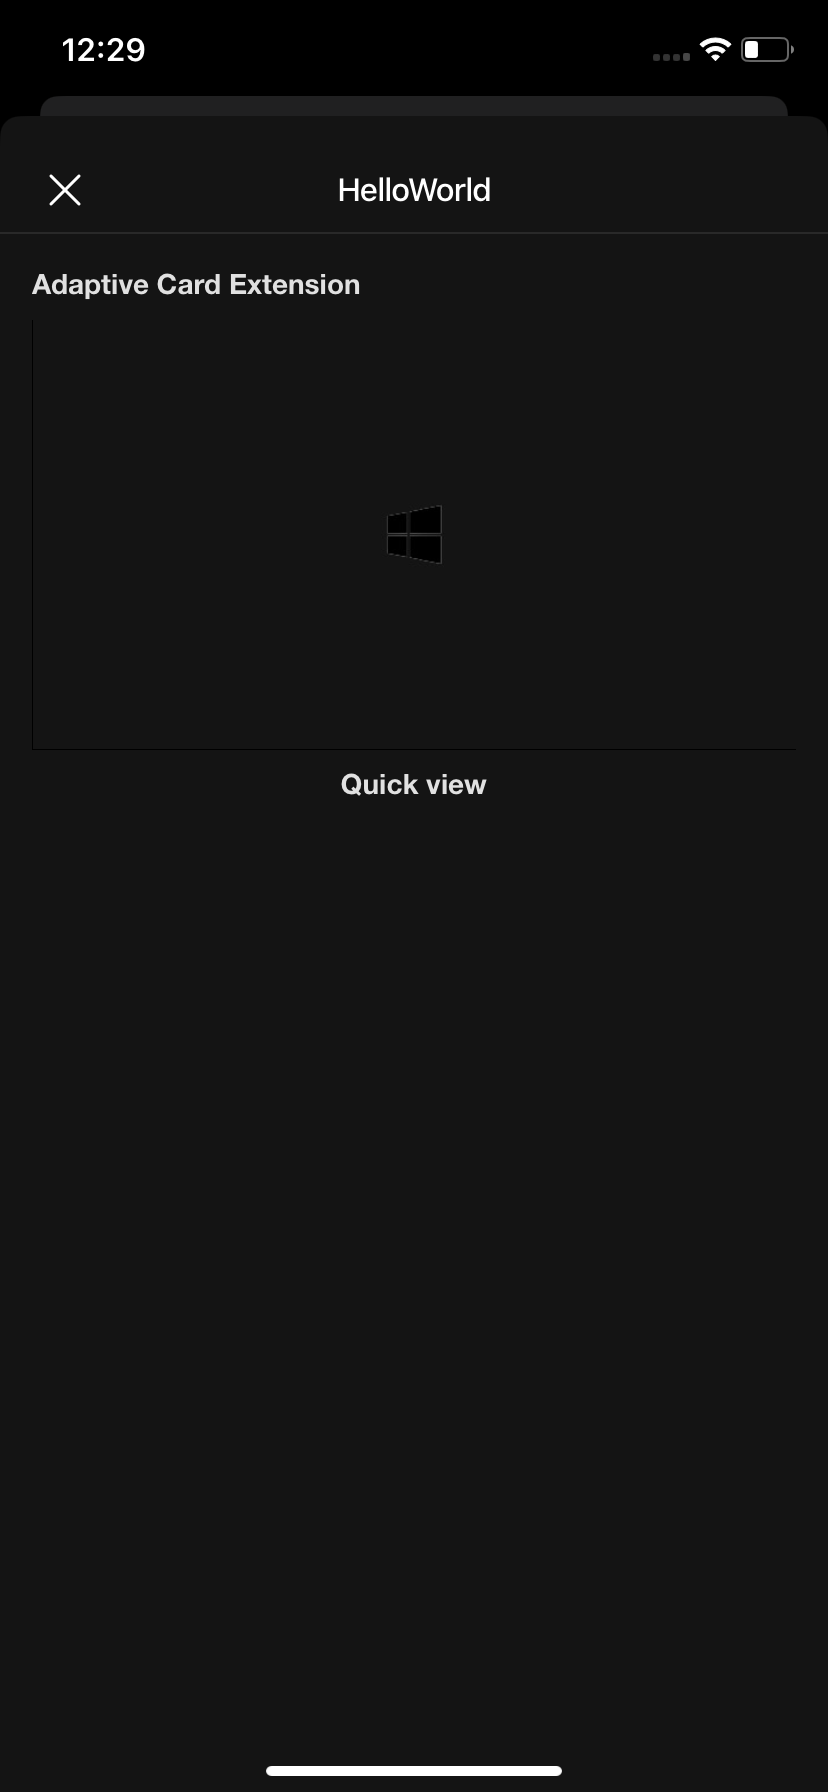 Screenshot that shows how the same image in quick view viewed on mobile appears in dark mode.